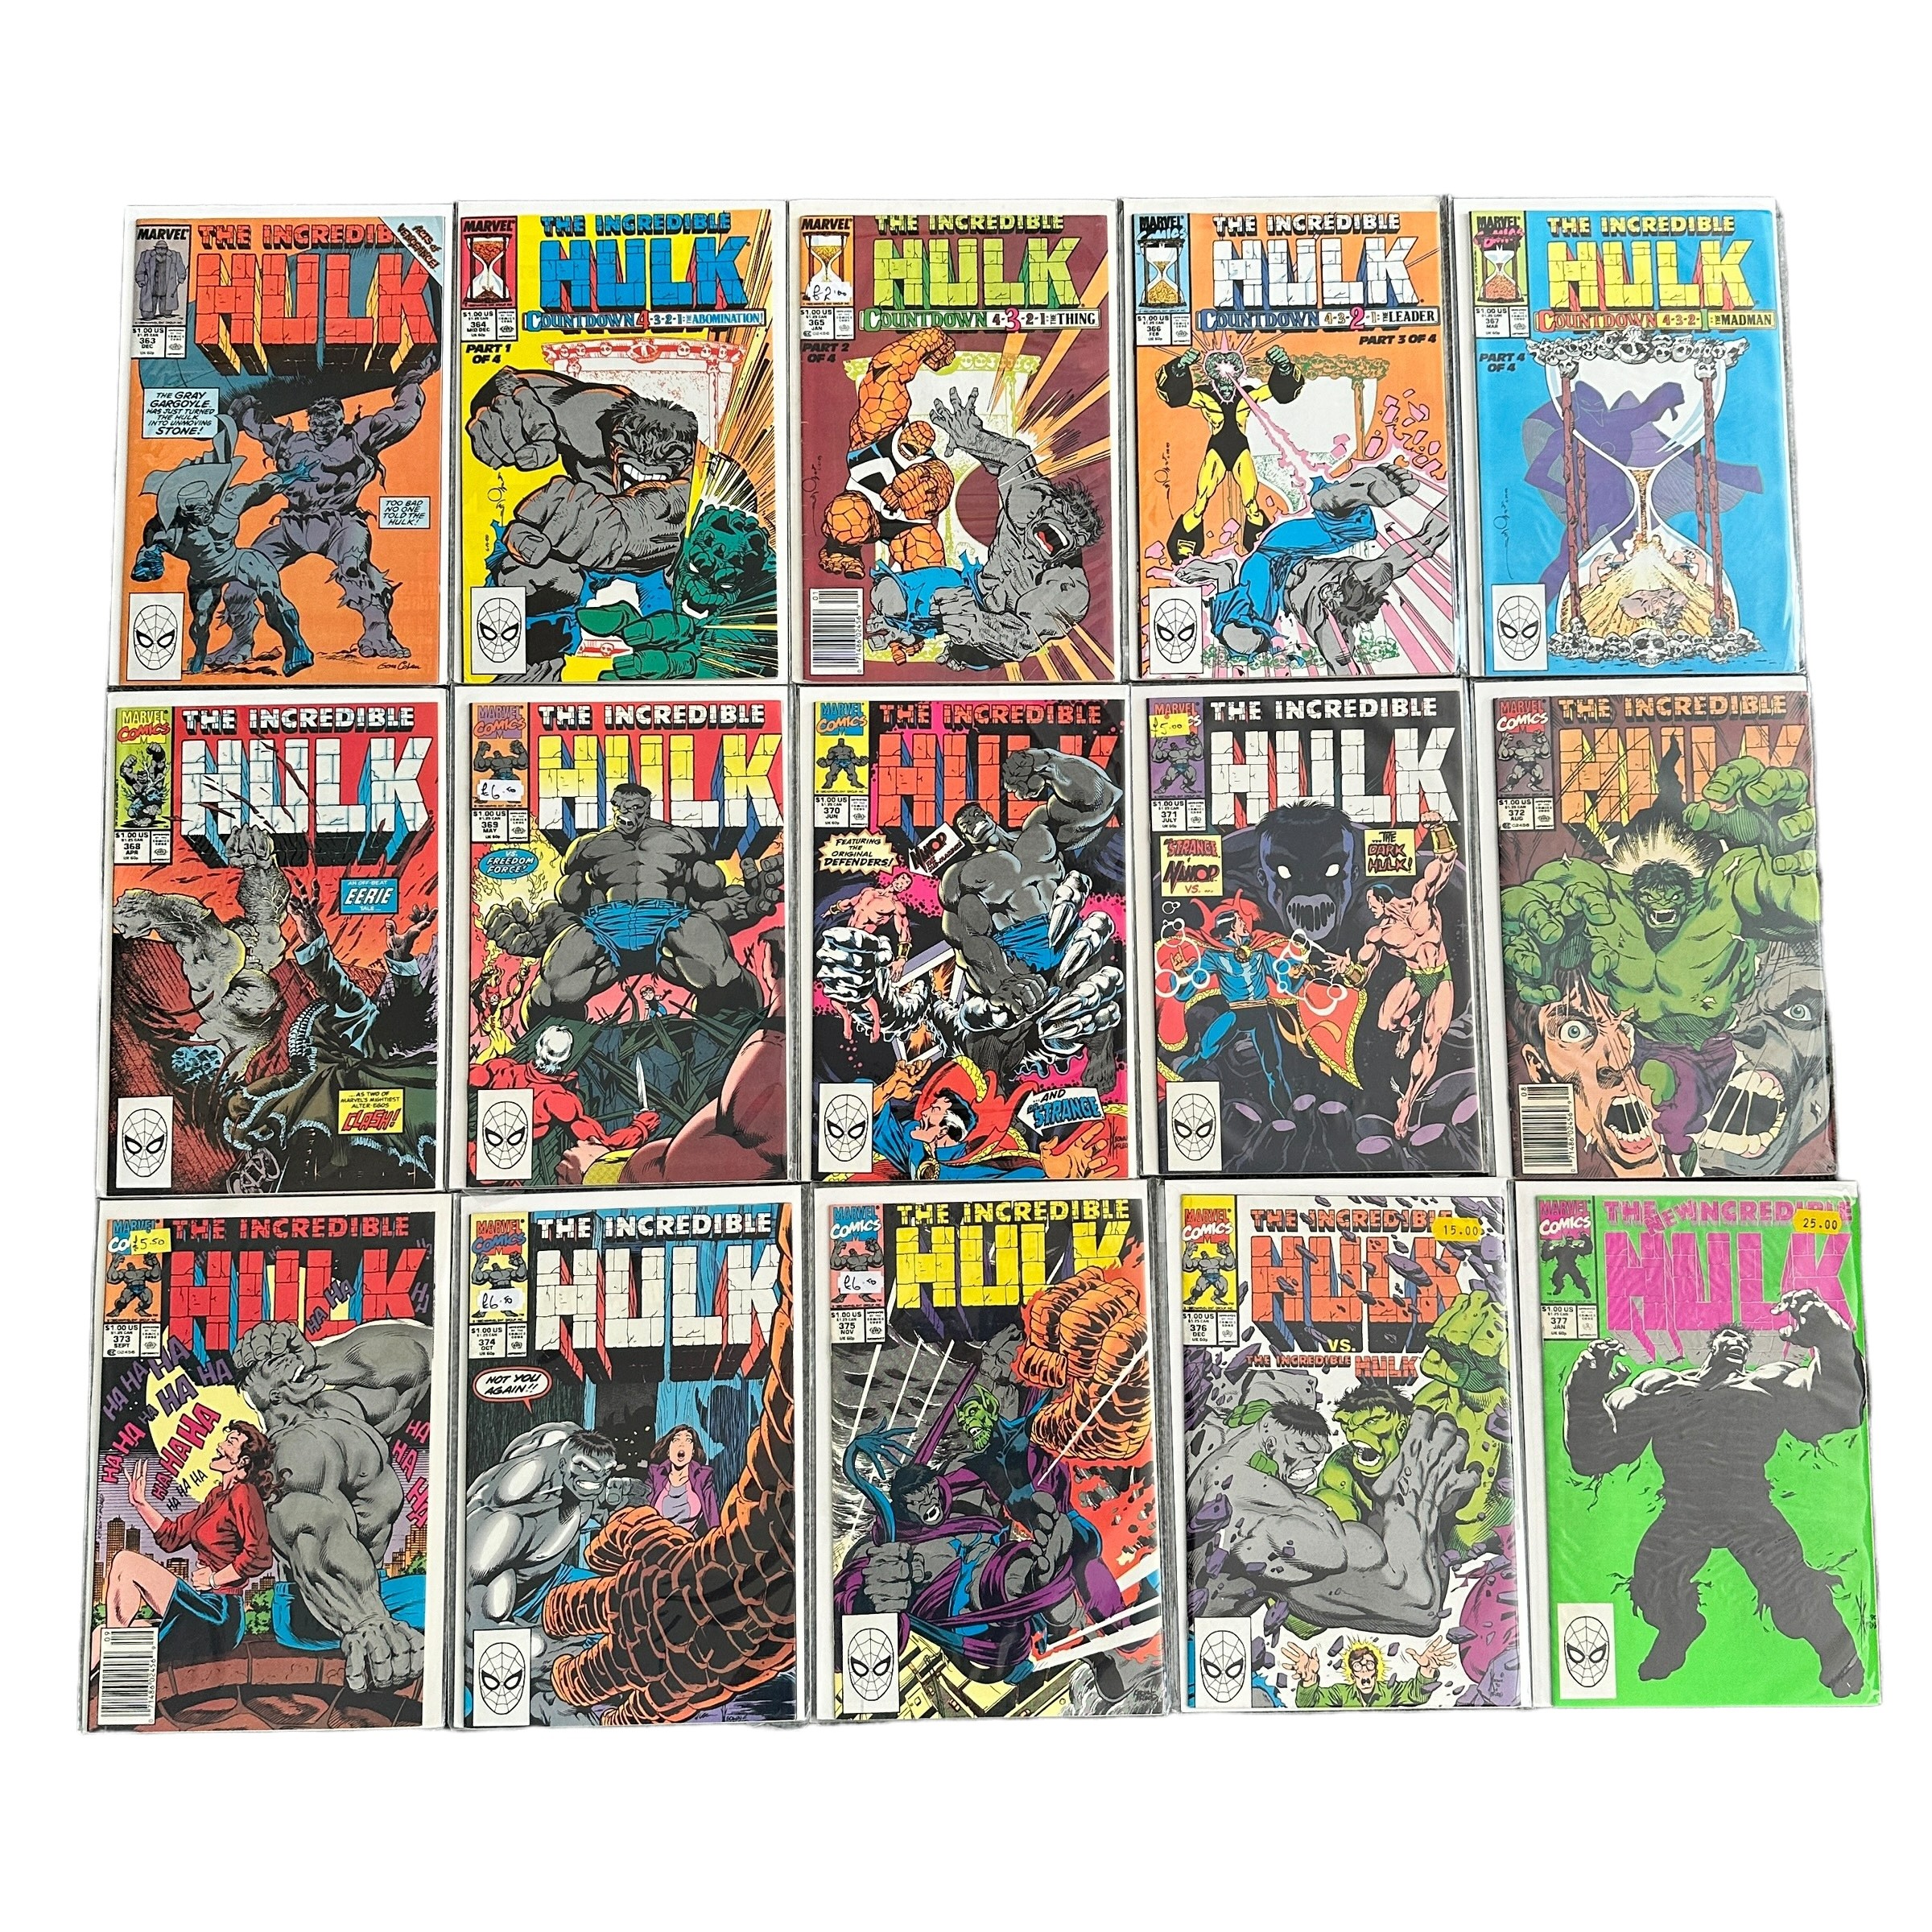 Marvel Comics The Incredible Hulk 1980/90s Nos 363-387: All 25 comics are bagged & boarded, NM.